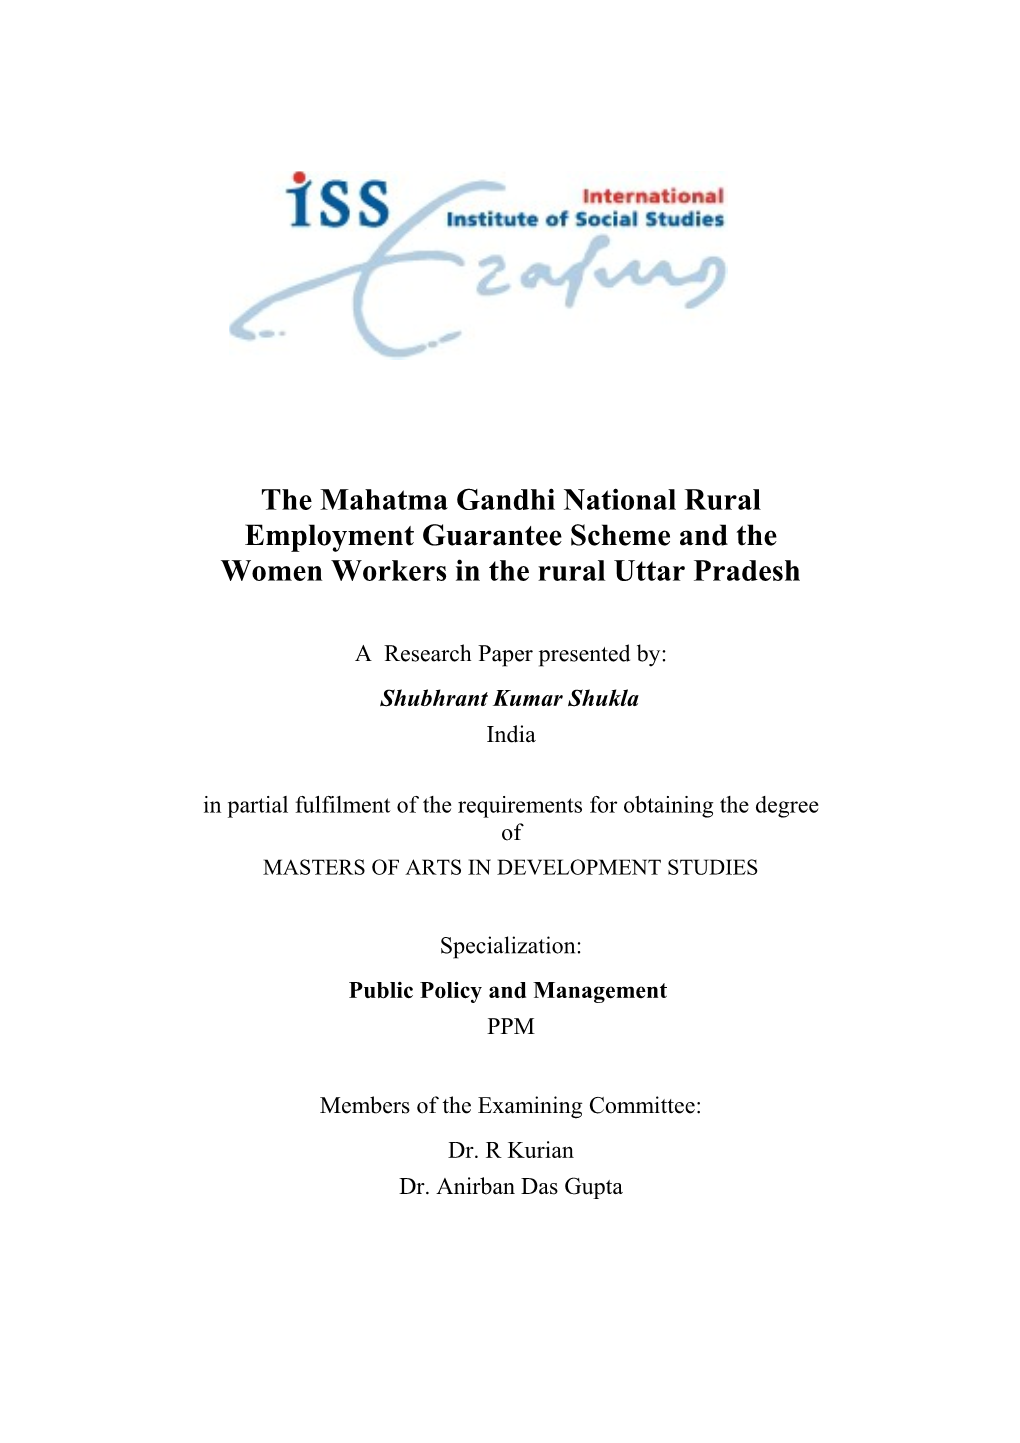 The Mahatma Gandhi National Rural Employment Guarantee Scheme and the Women Workers In